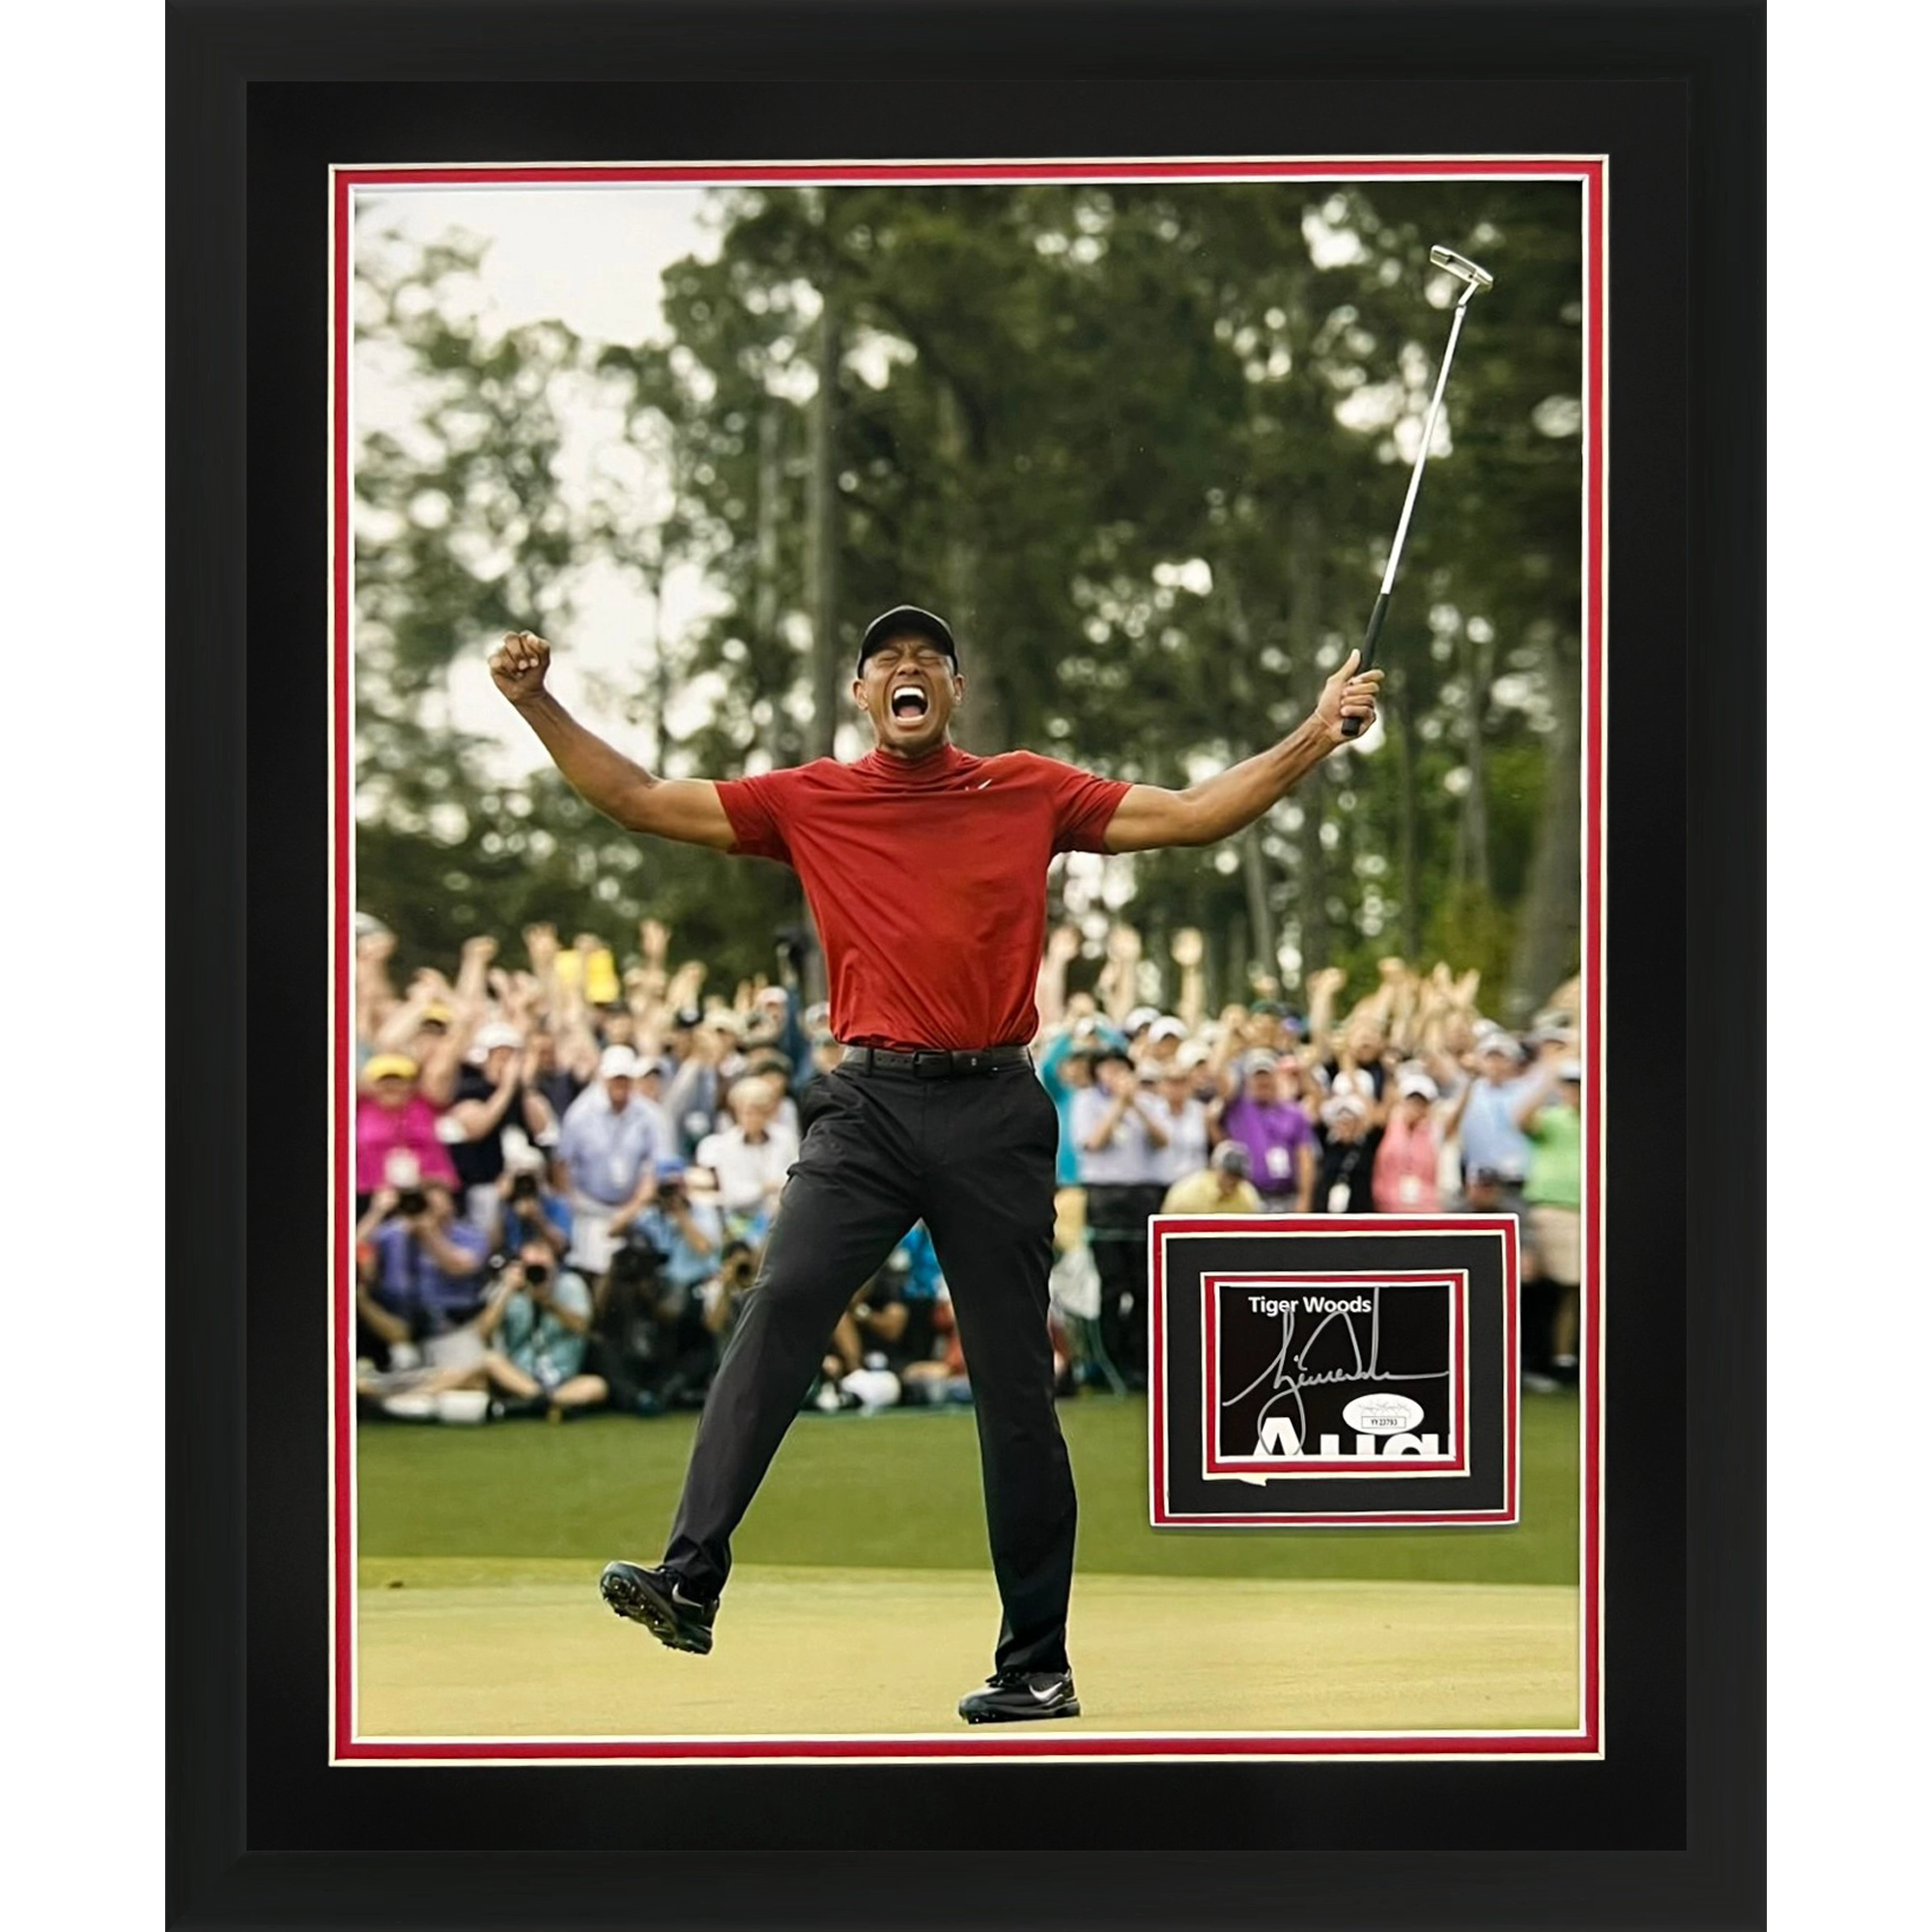 Tiger Woods 2019 Masters Celebration 16x20 Deluxe Framed with Cut Signature - JSA